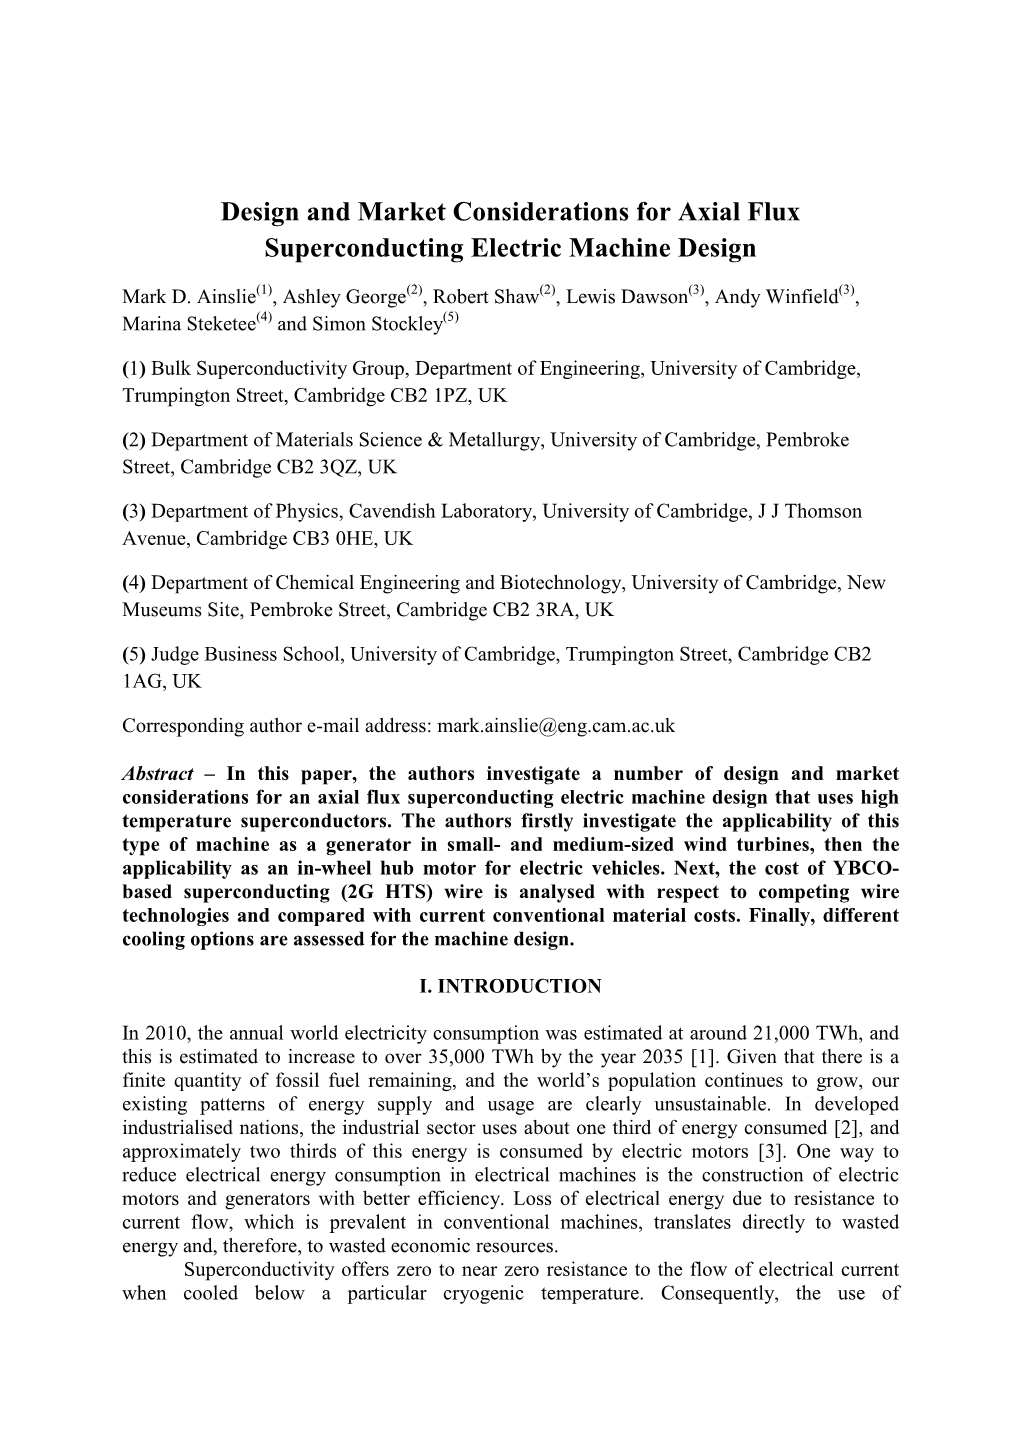 Design and Market Considerations for Axial Flux Superconducting Electric Machine Design